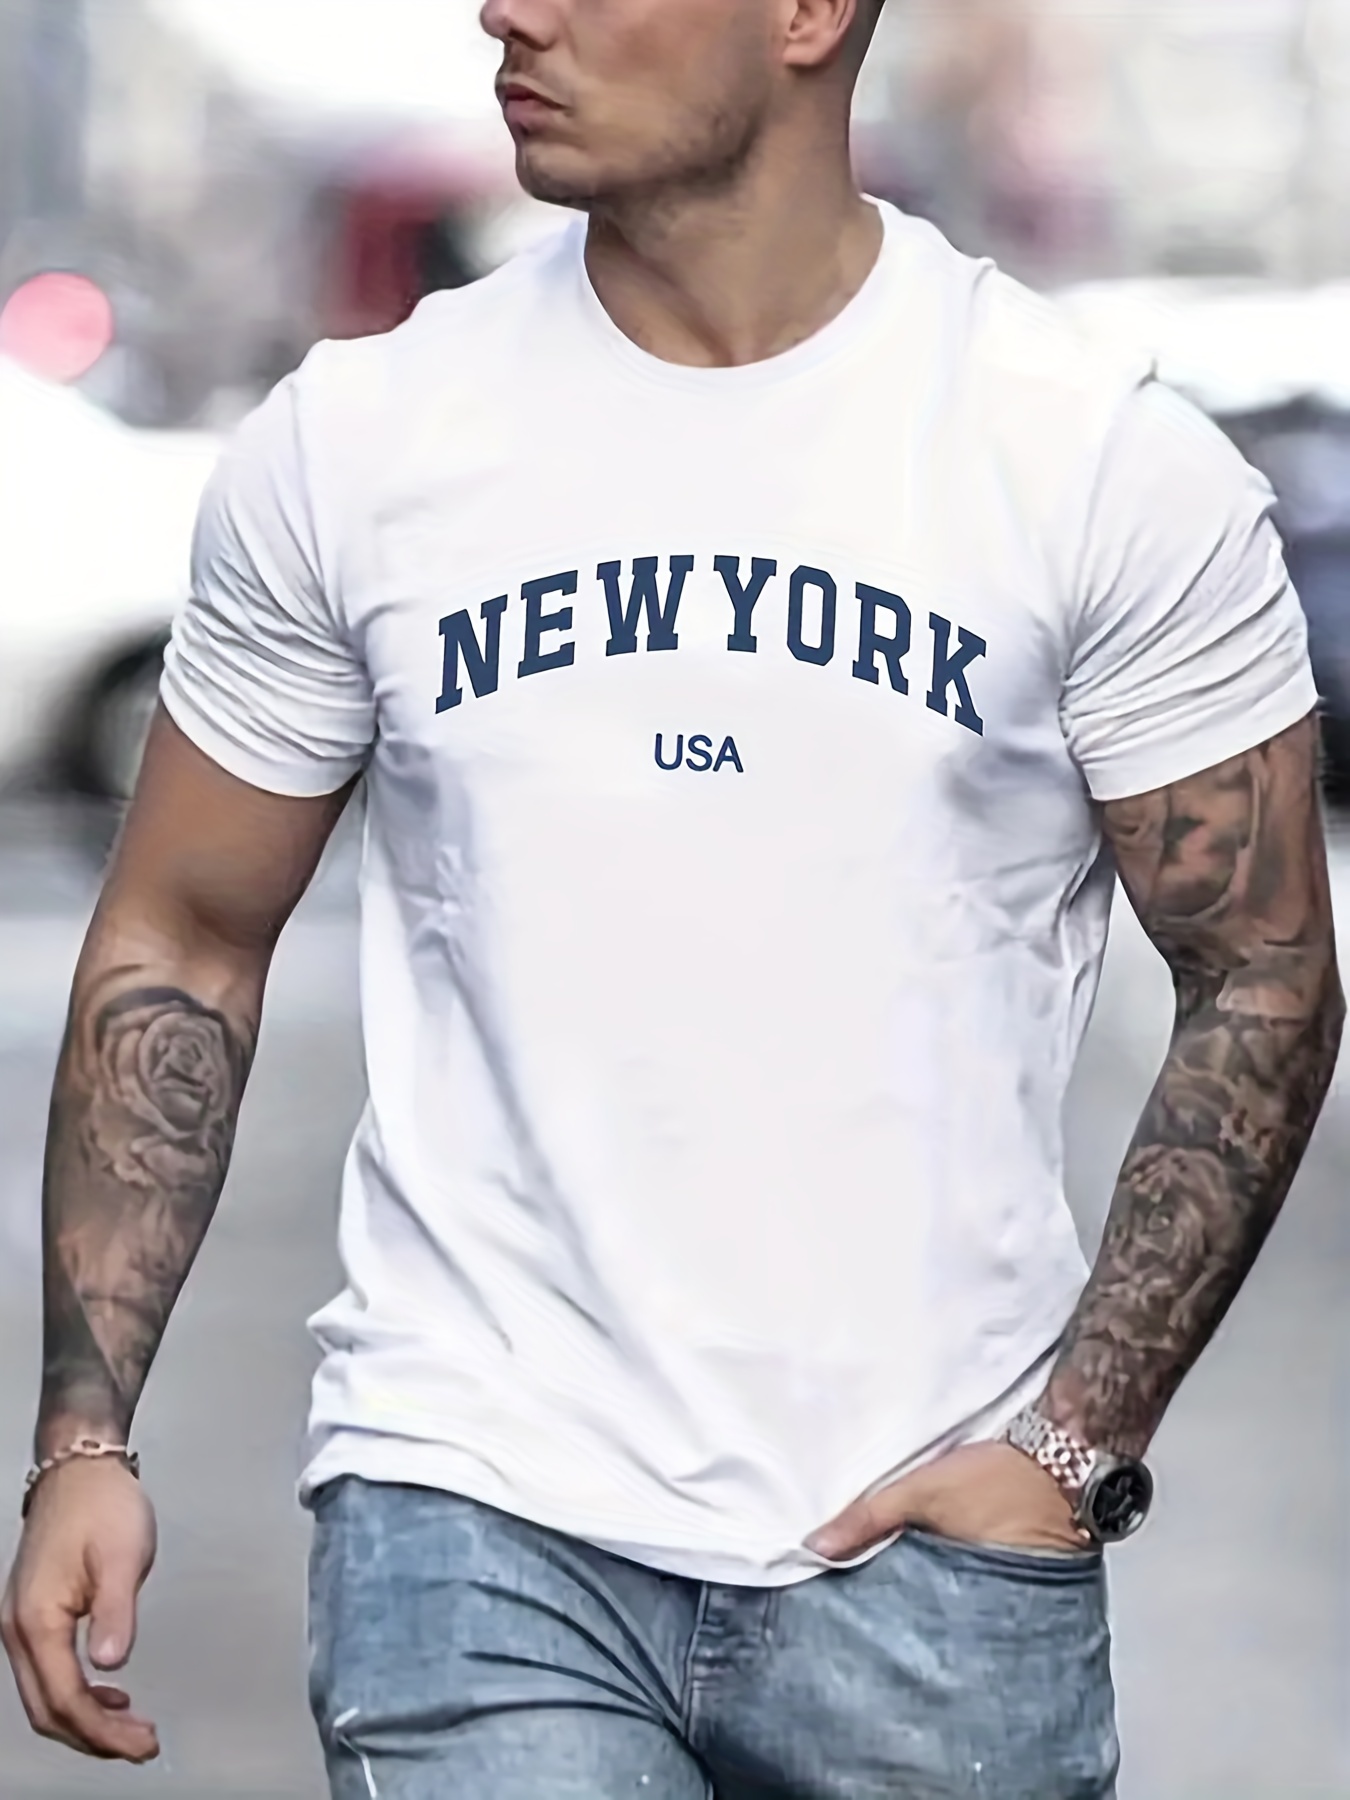 new york usa print t shirt tees for men casual short sleeve tshirt for summer spring fall tops as gifts details 5